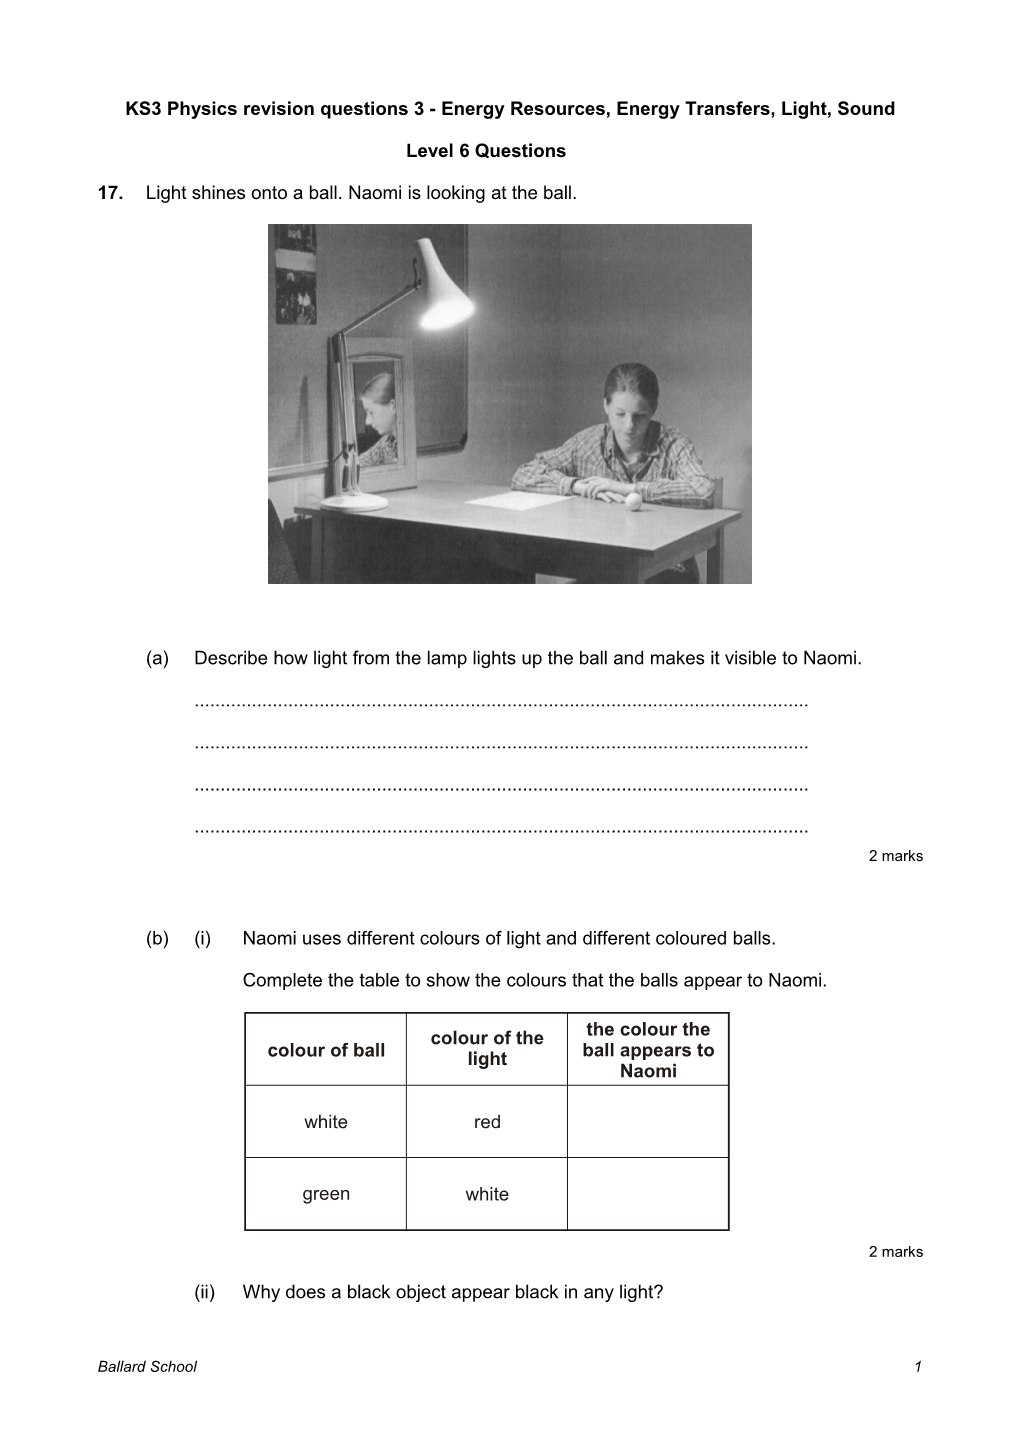 KS3 Physics Revision Questions 3 - Energy Resources, Energy Transfers, Light, Sound